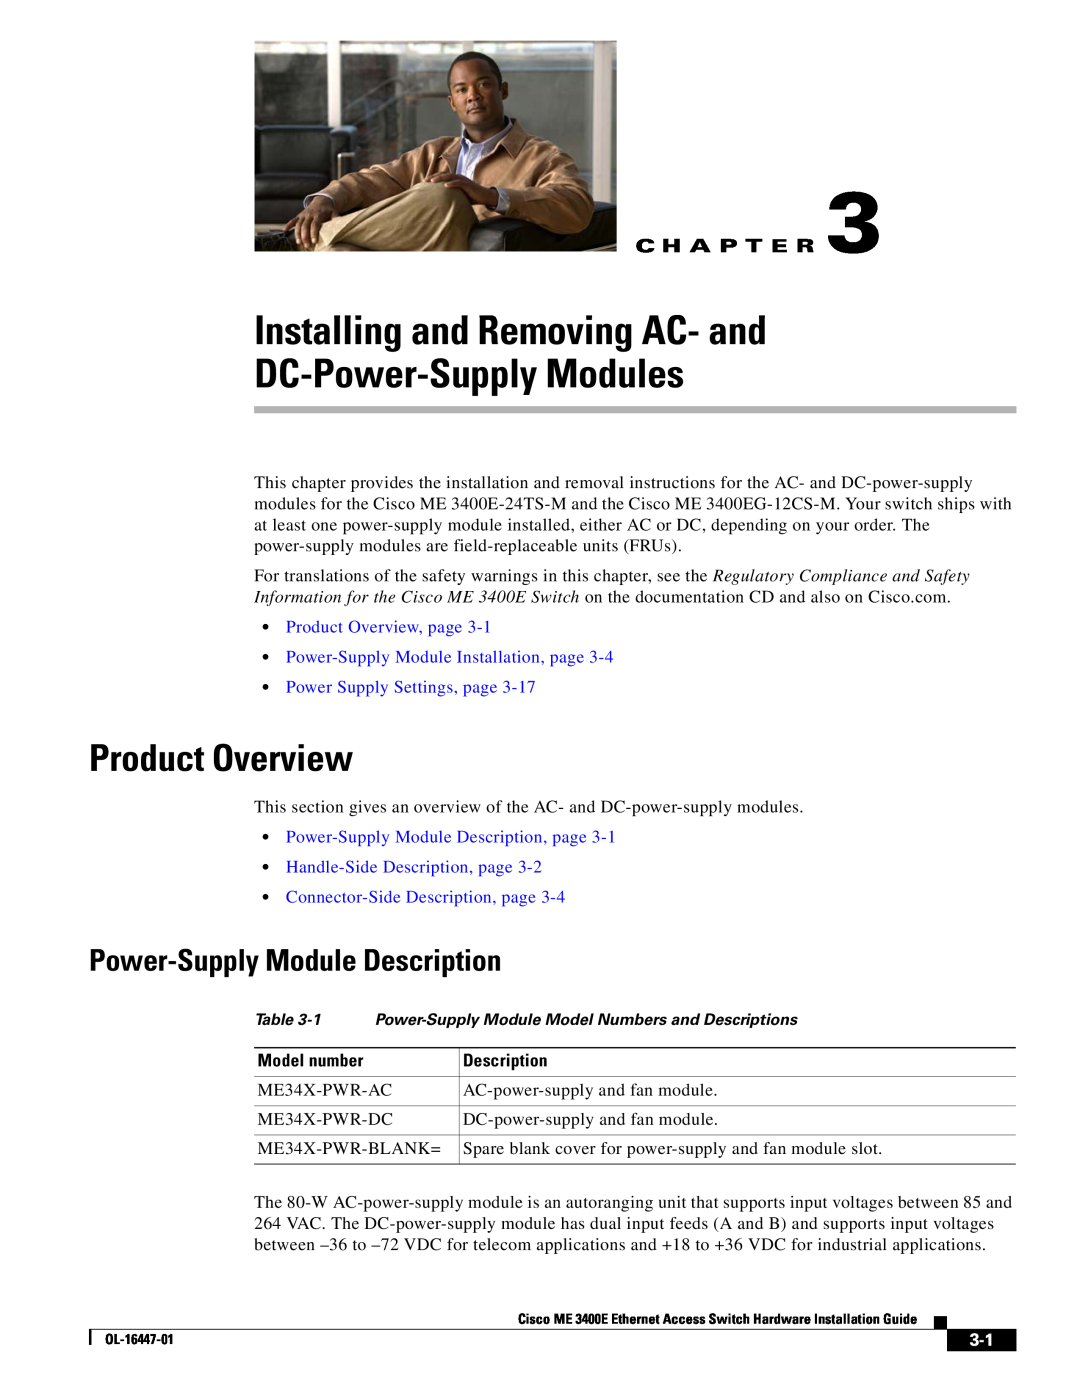 Cisco Systems OL-16447-01 manual Installing and Removing AC- and DC-Power-Supply Modules, Product Overview, C H A P T E R 